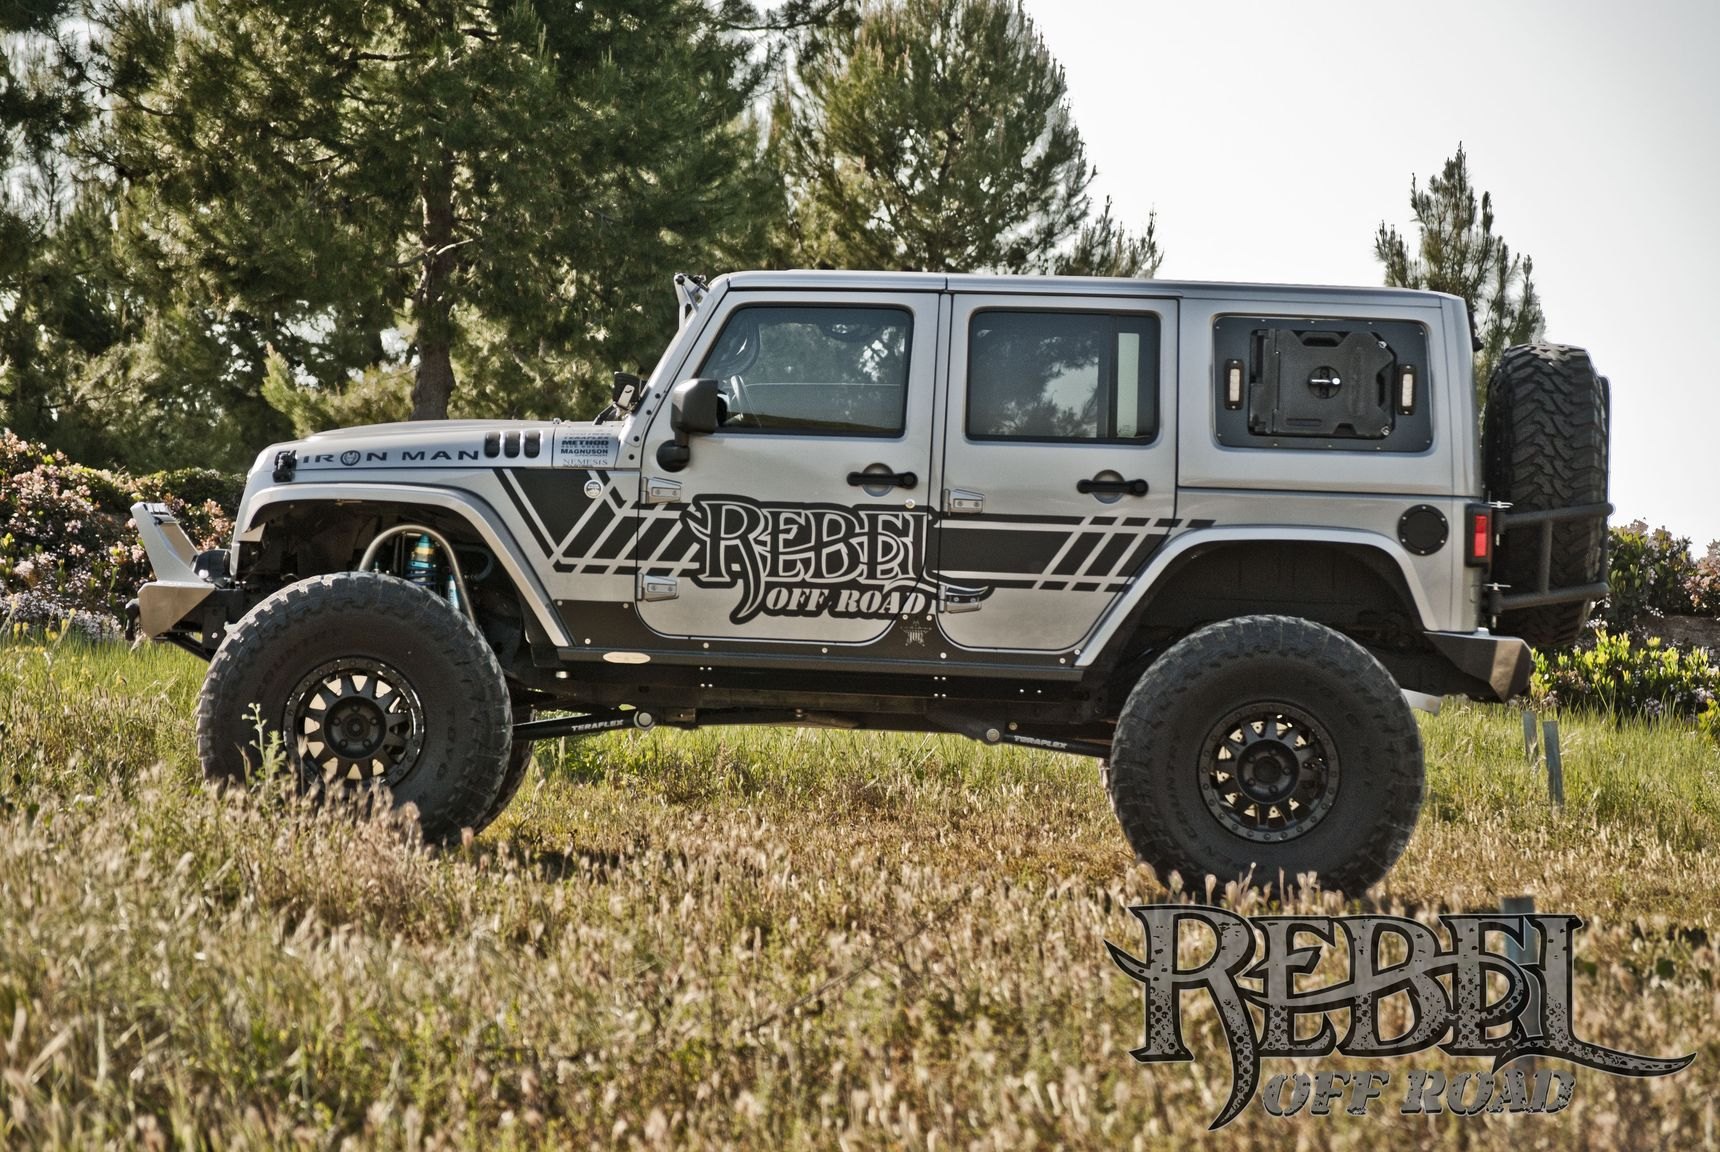 Impressive Rebel Off Road Build Gray Lifted Jeep Wrangler With Off